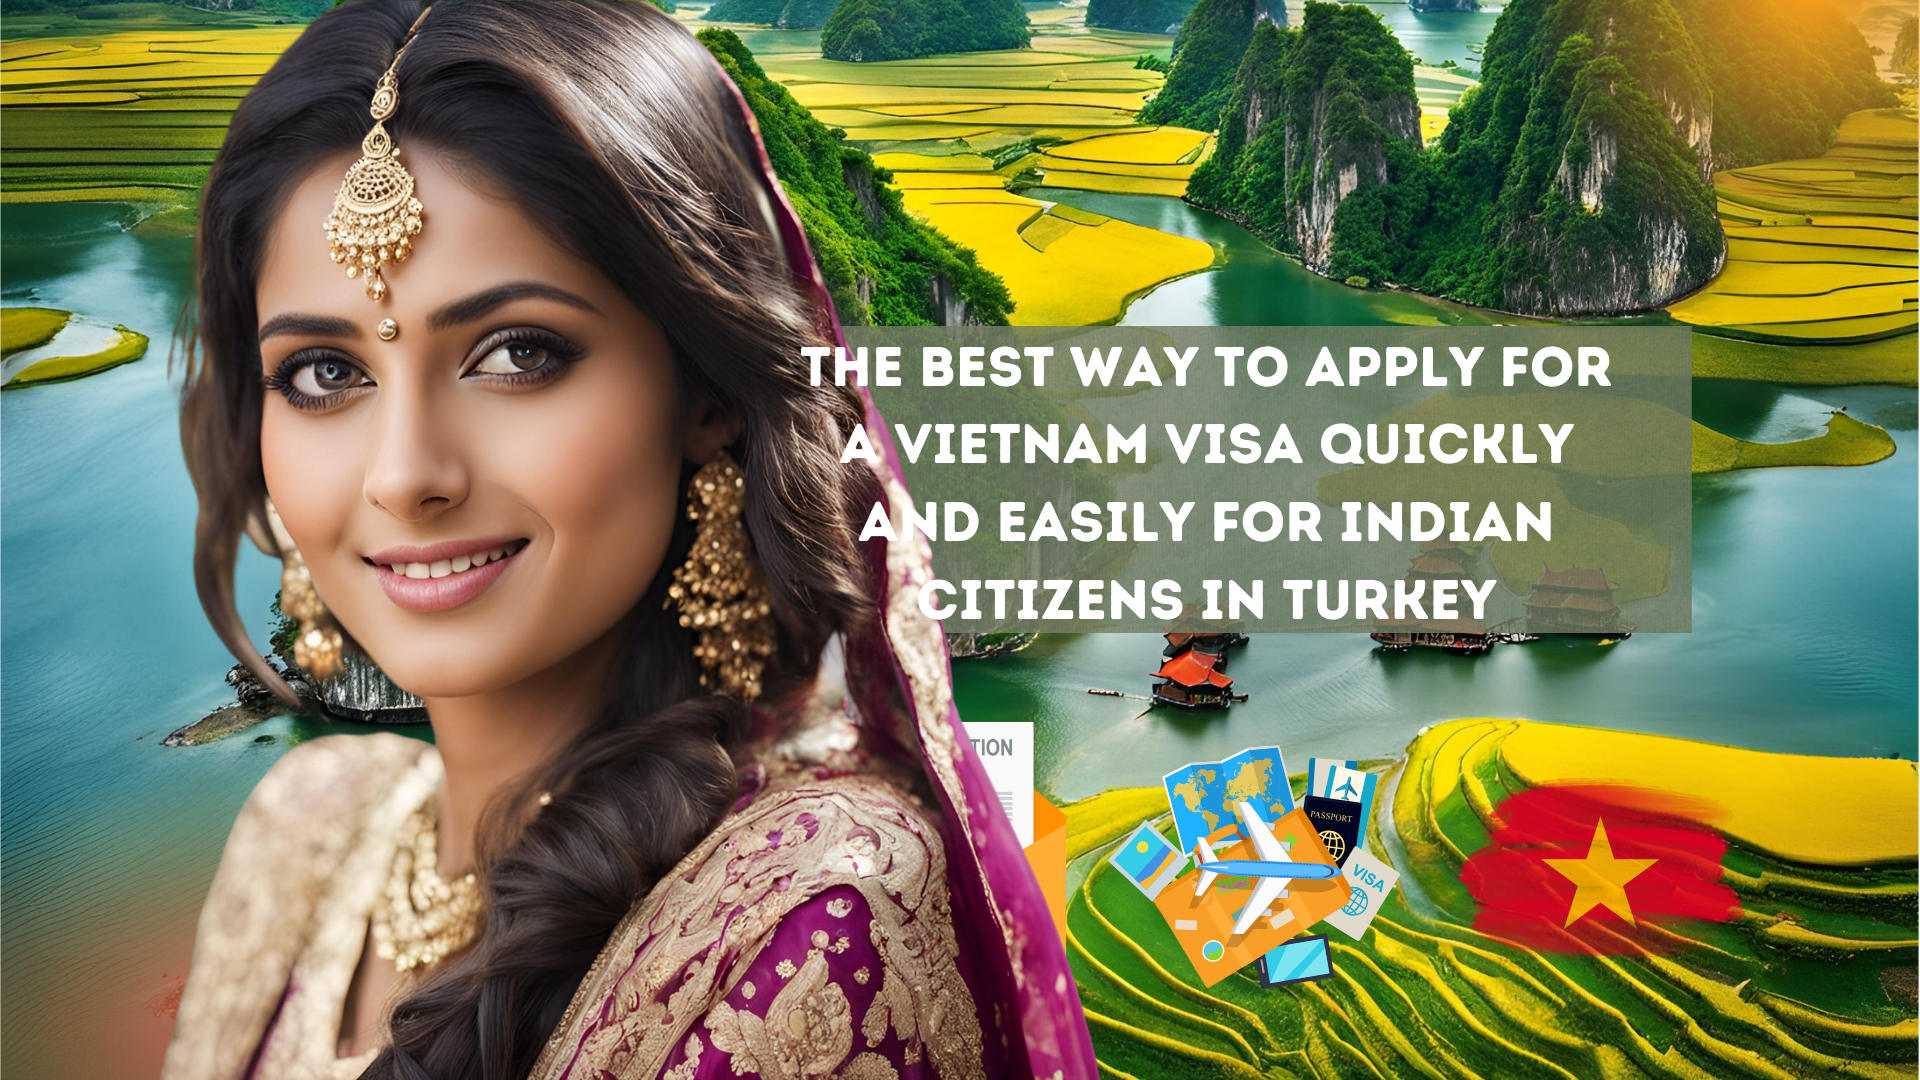 The best way to apply for a Vietnam visa quickly and easily for Indian citizens in Turkey